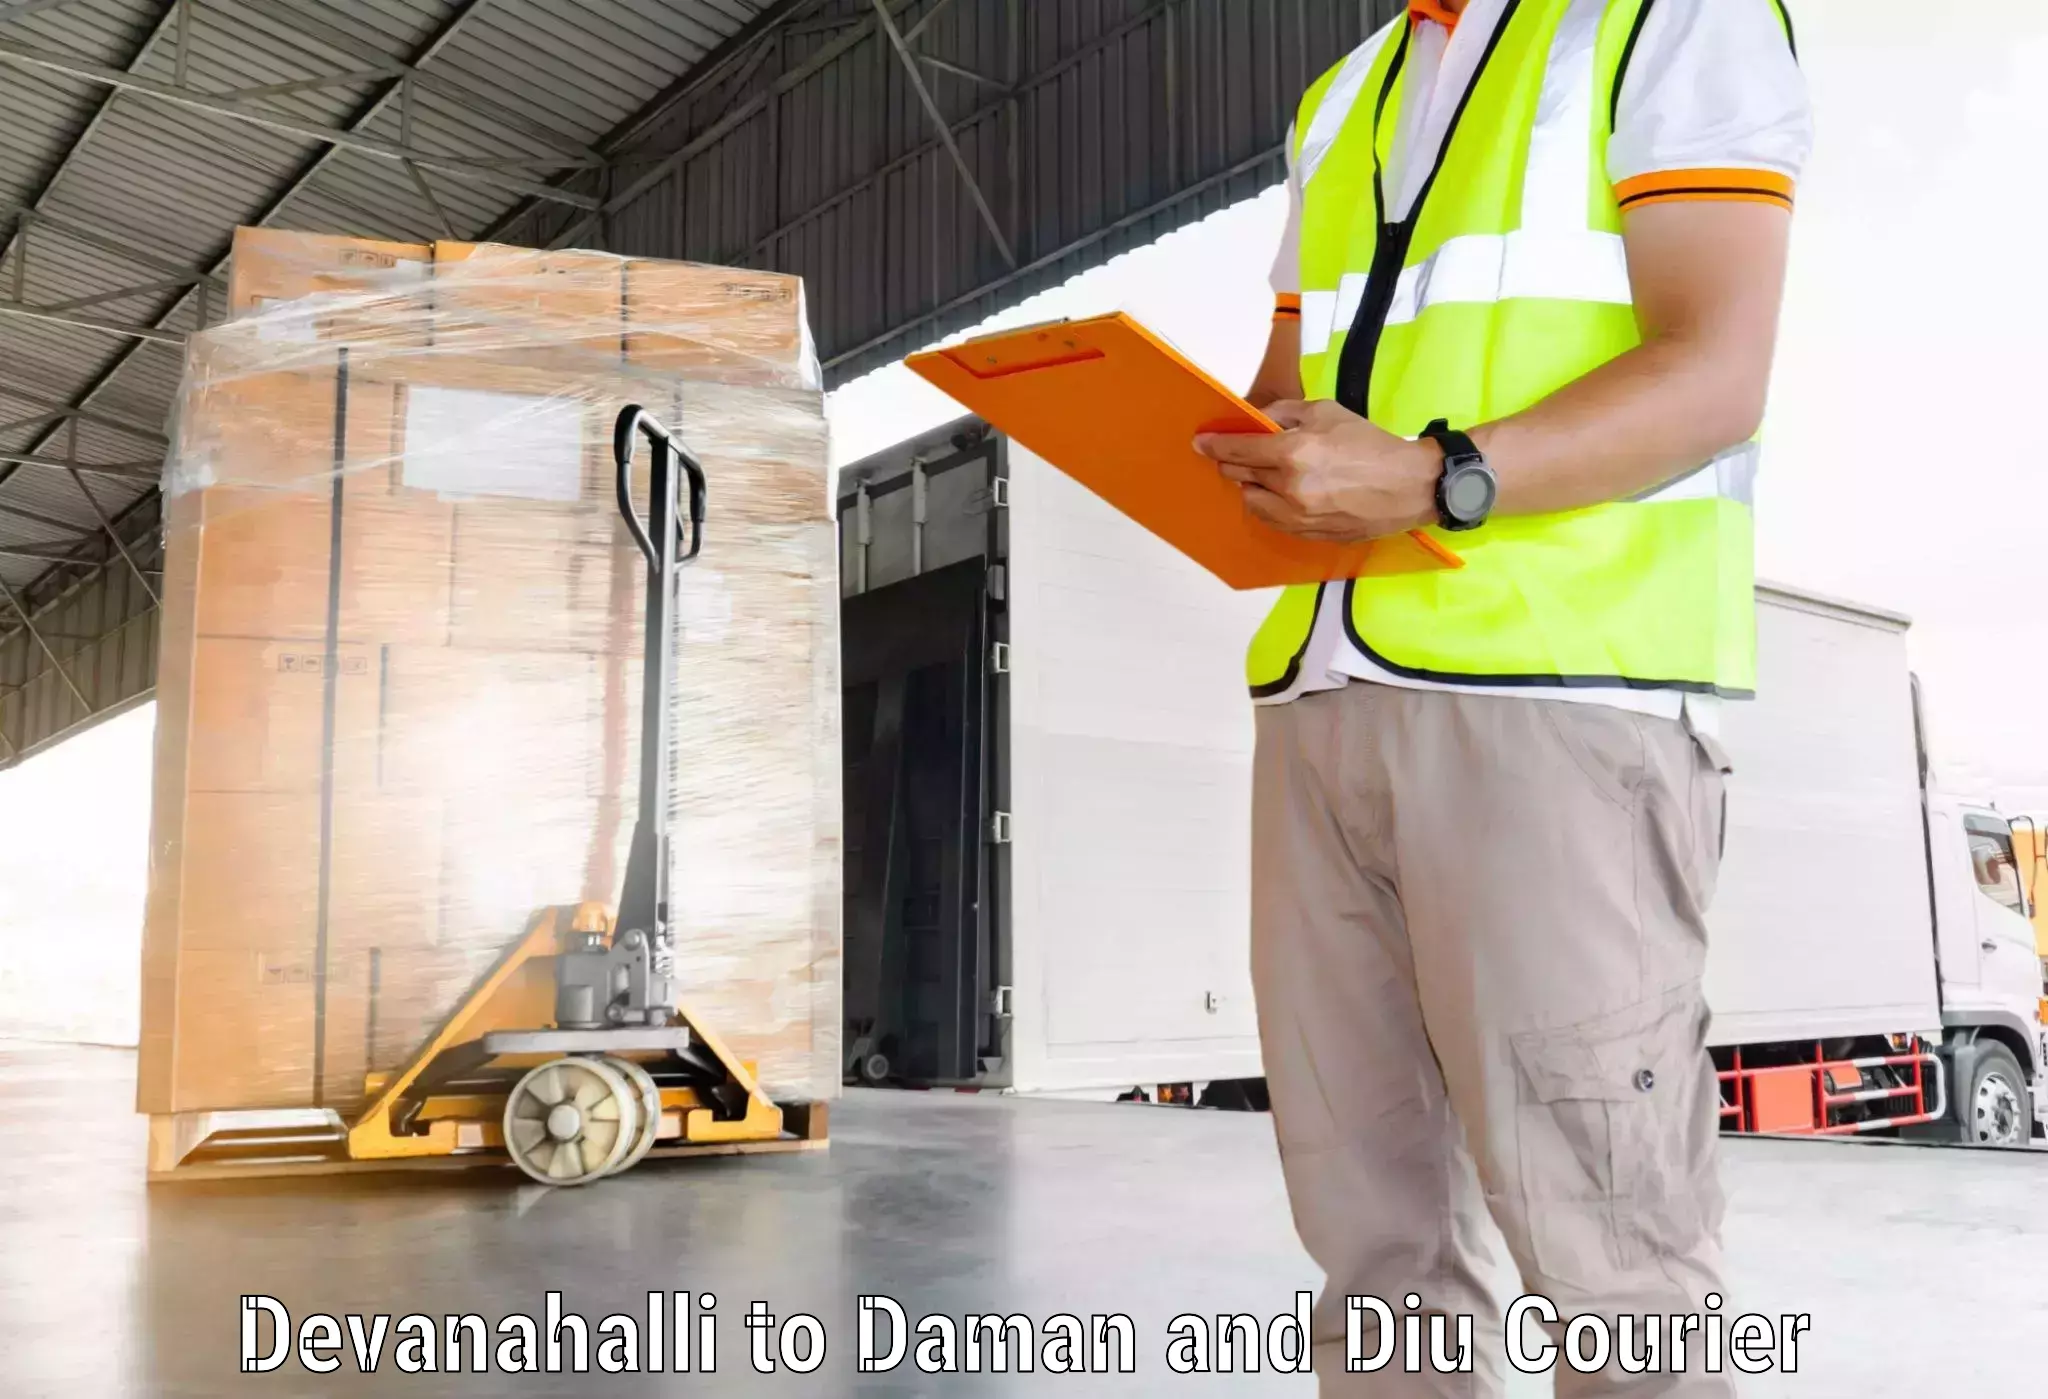 Automated parcel services Devanahalli to Daman and Diu